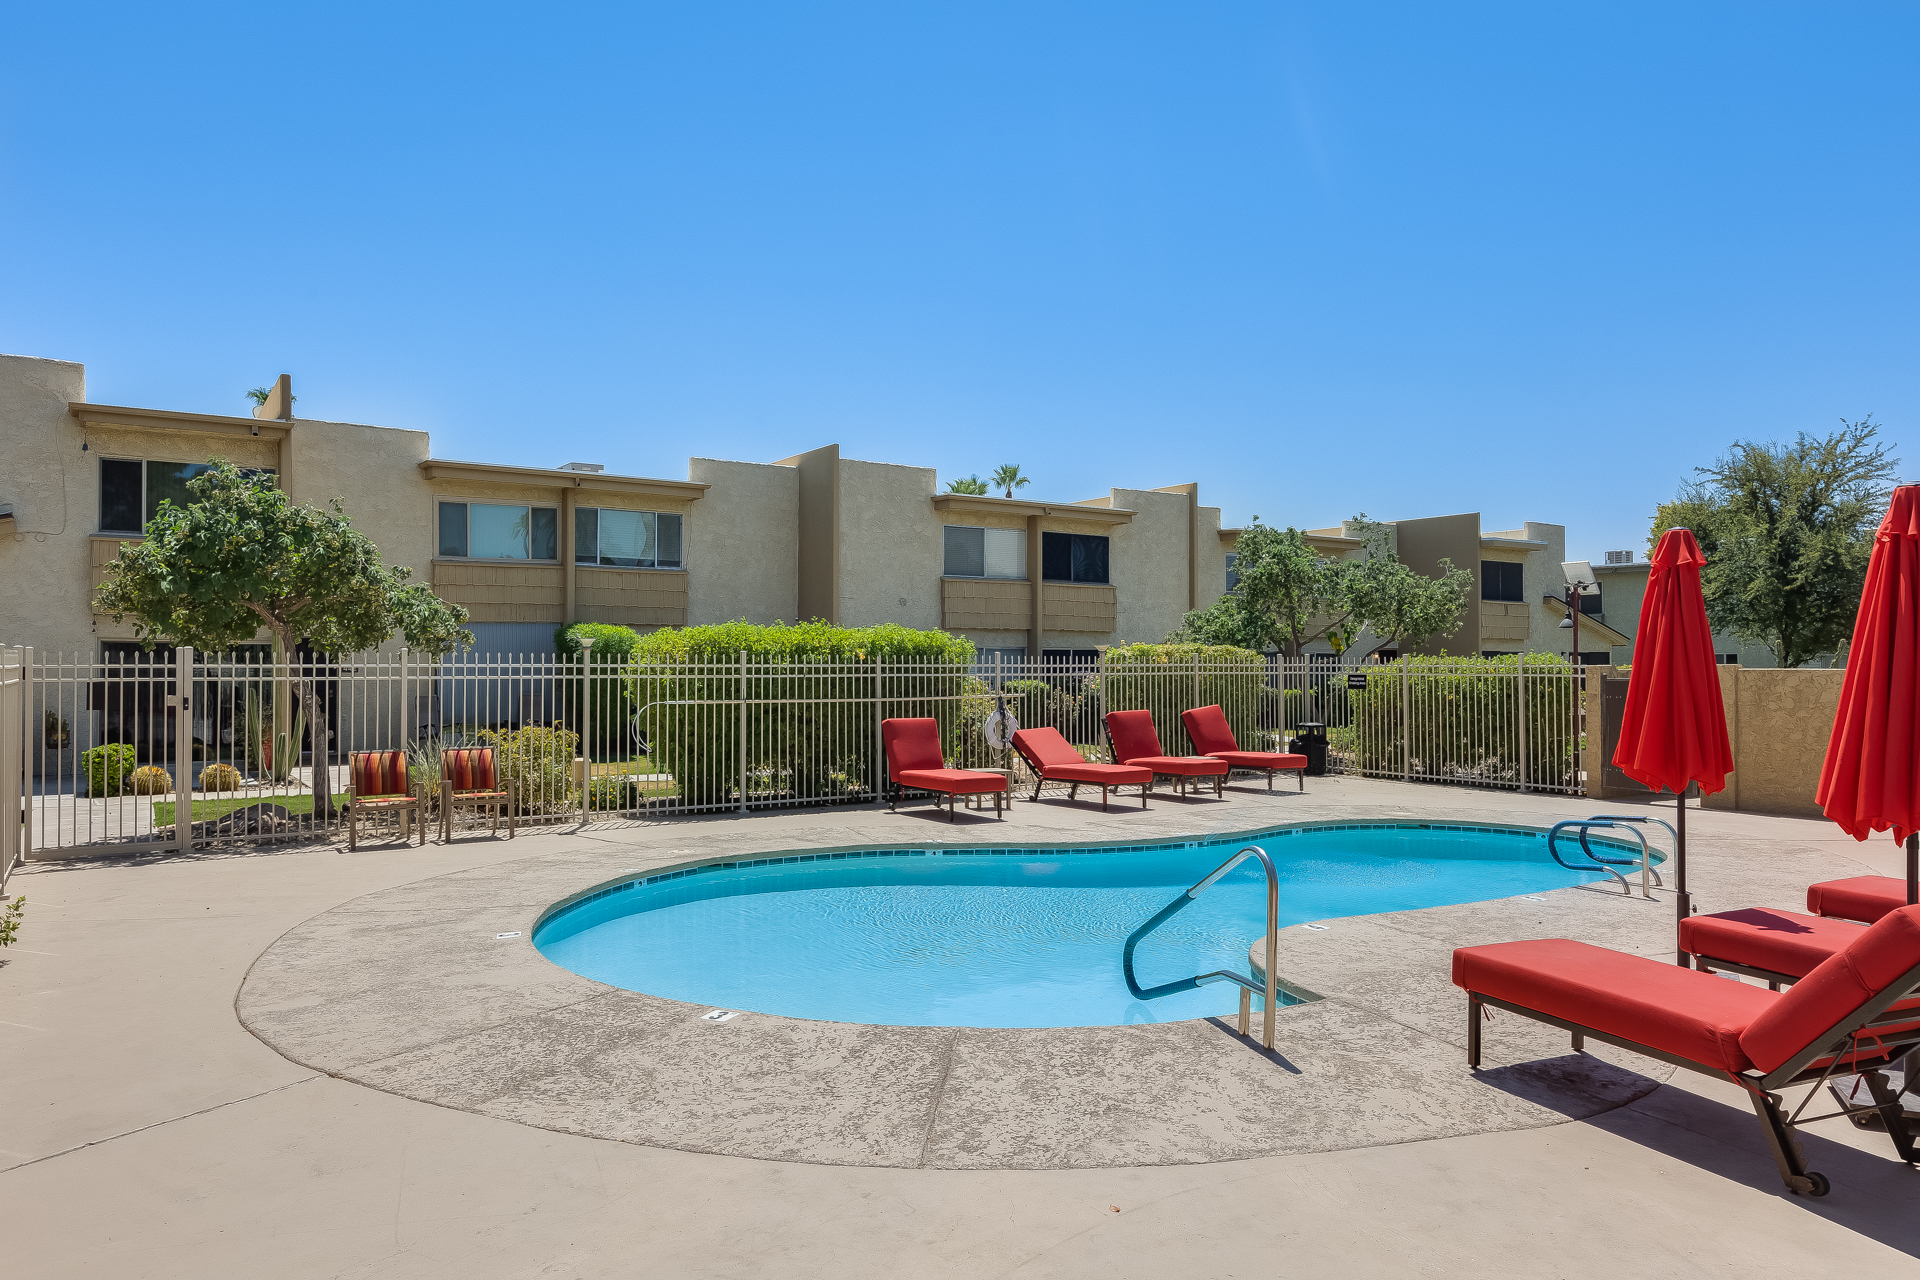 The condo's centerpiece is a stunning community pool, perfect for a refreshing dip or lounging under the Arizona sun.